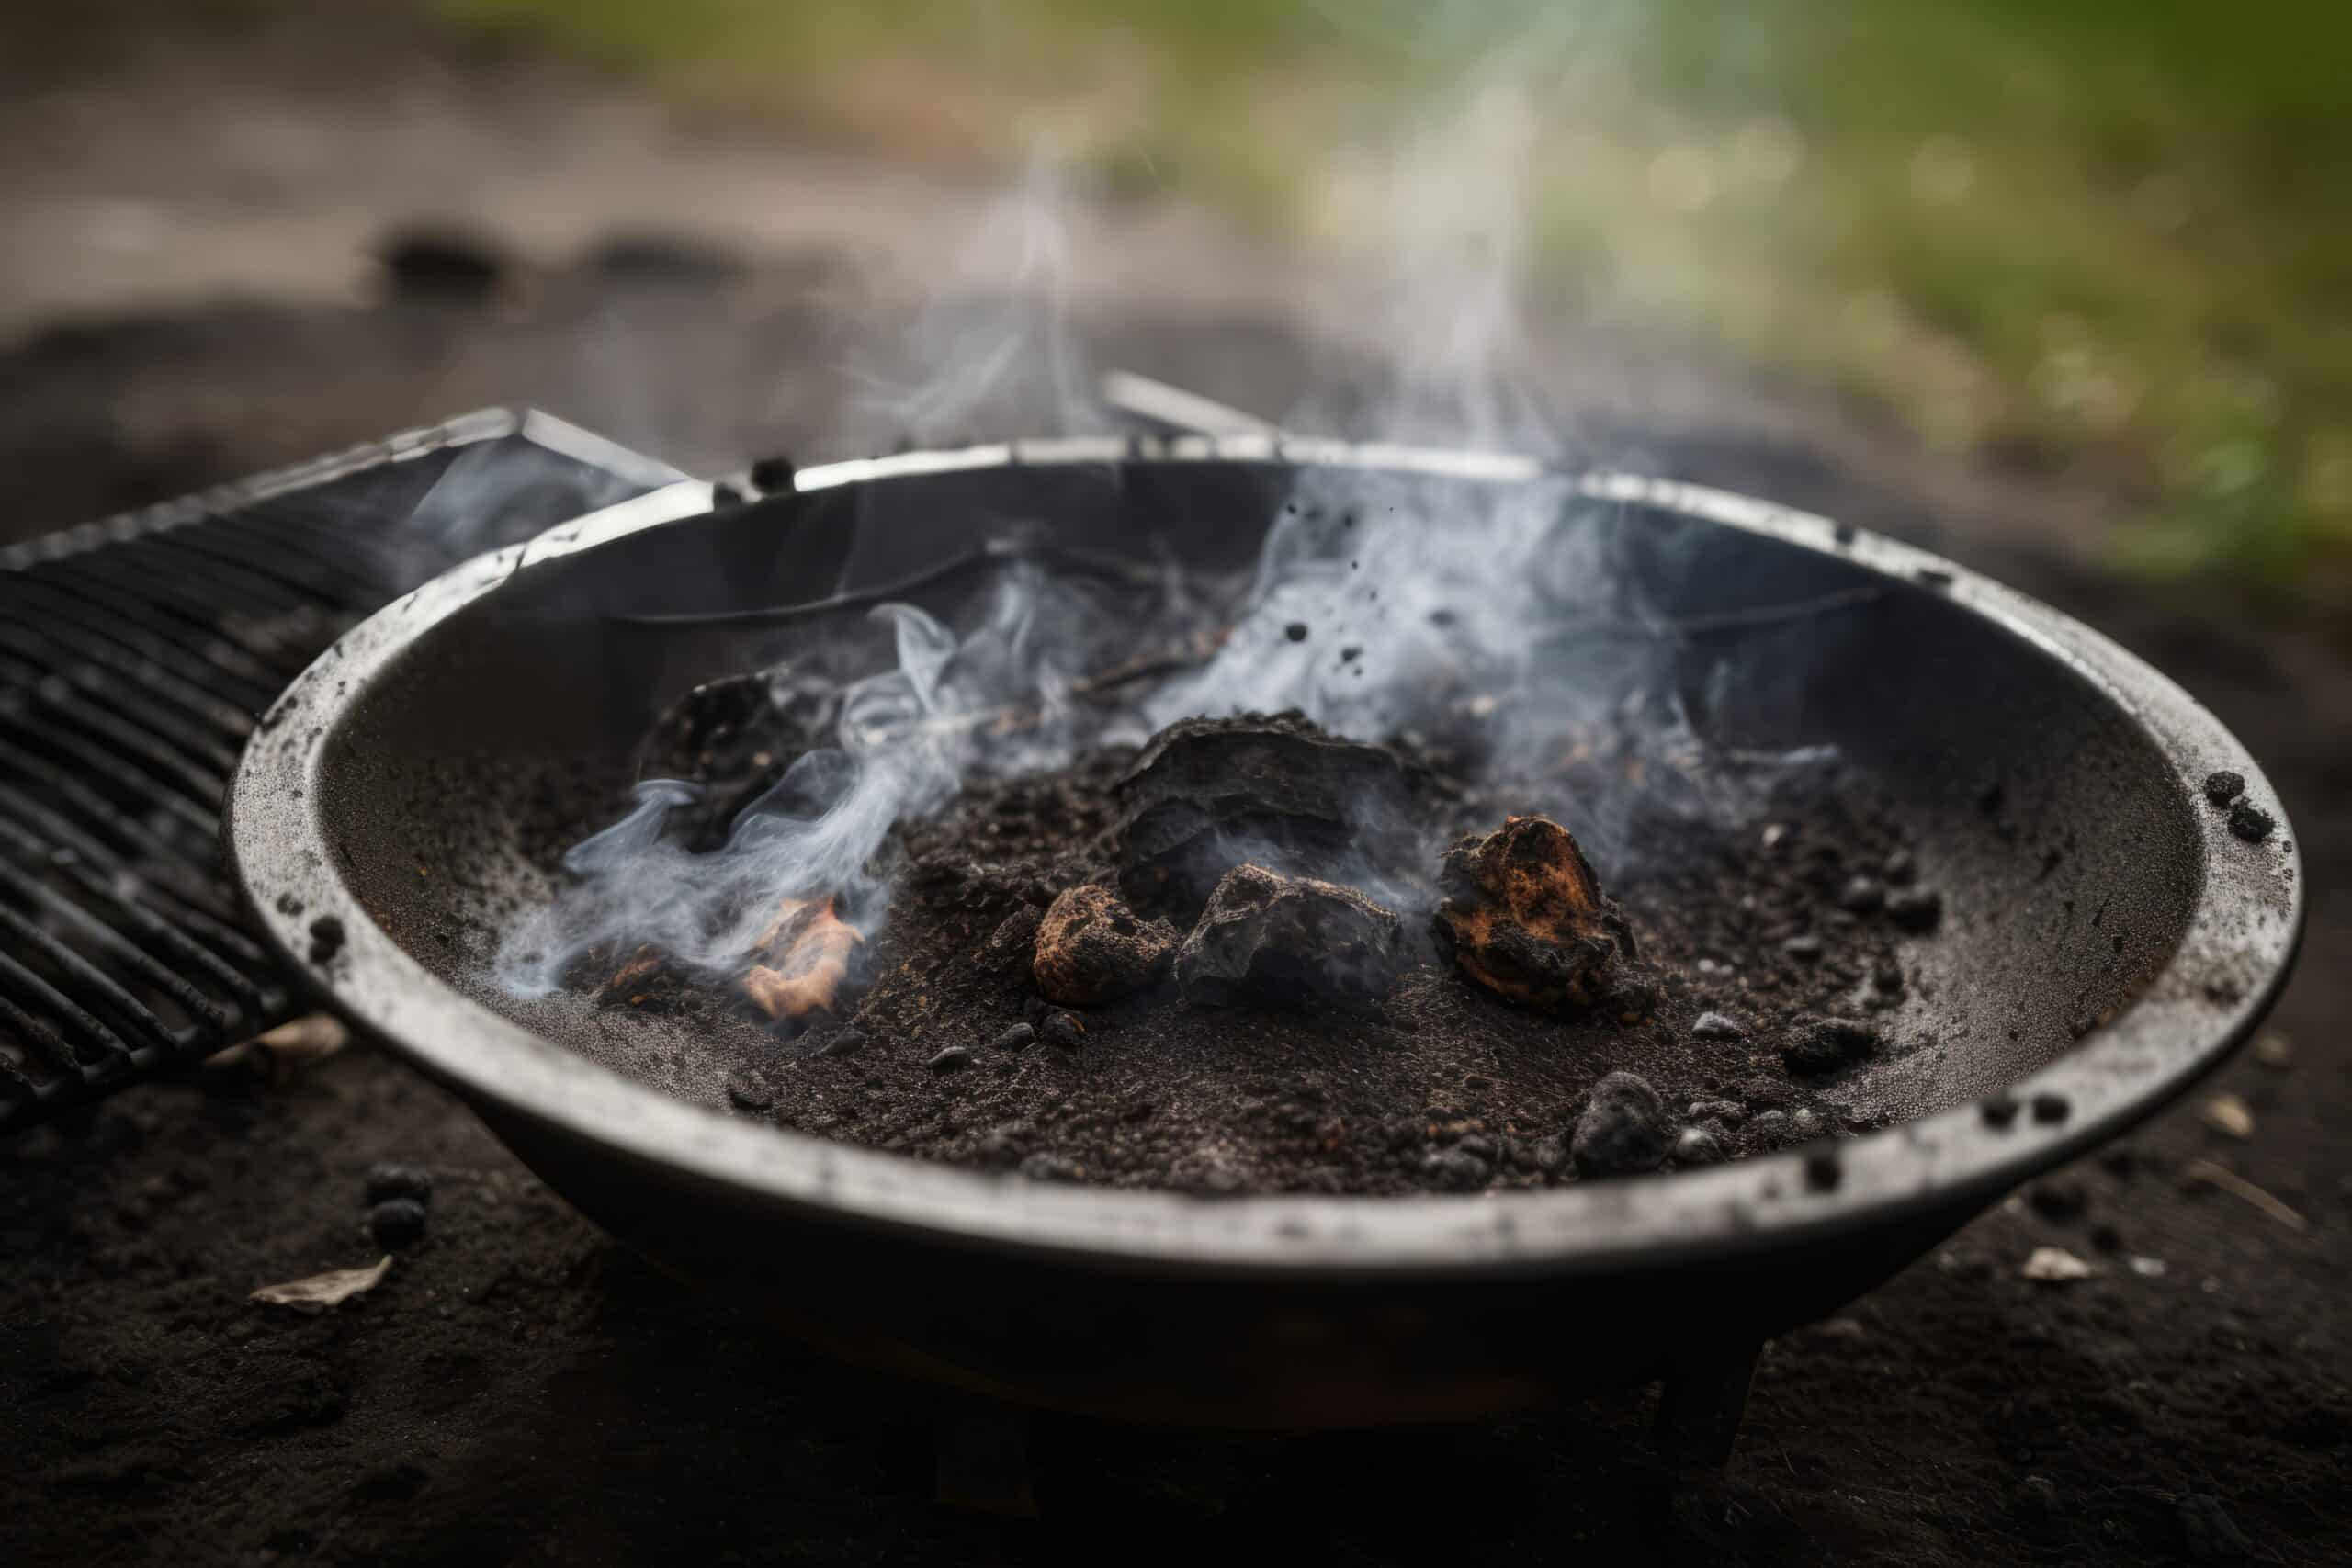 www.appr.com : How Do You Season A Charcoal Grill?